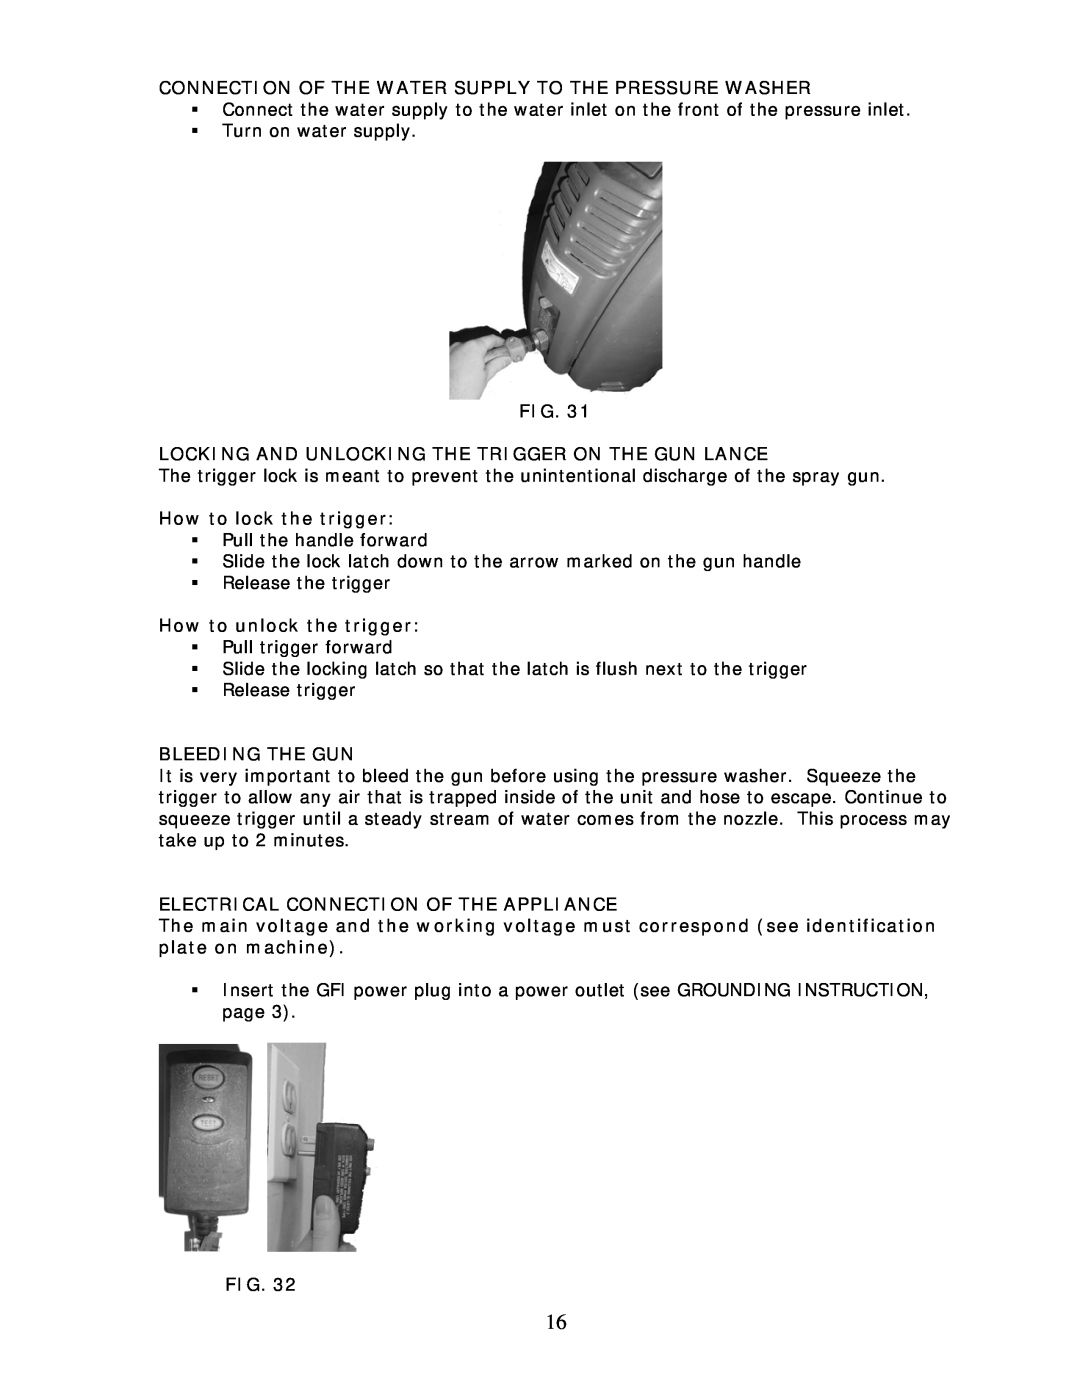 Wachsmuth & Krogmann QL-3100B manual Connection Of The Water Supply To The Pressure Washer, How to lock the trigger 